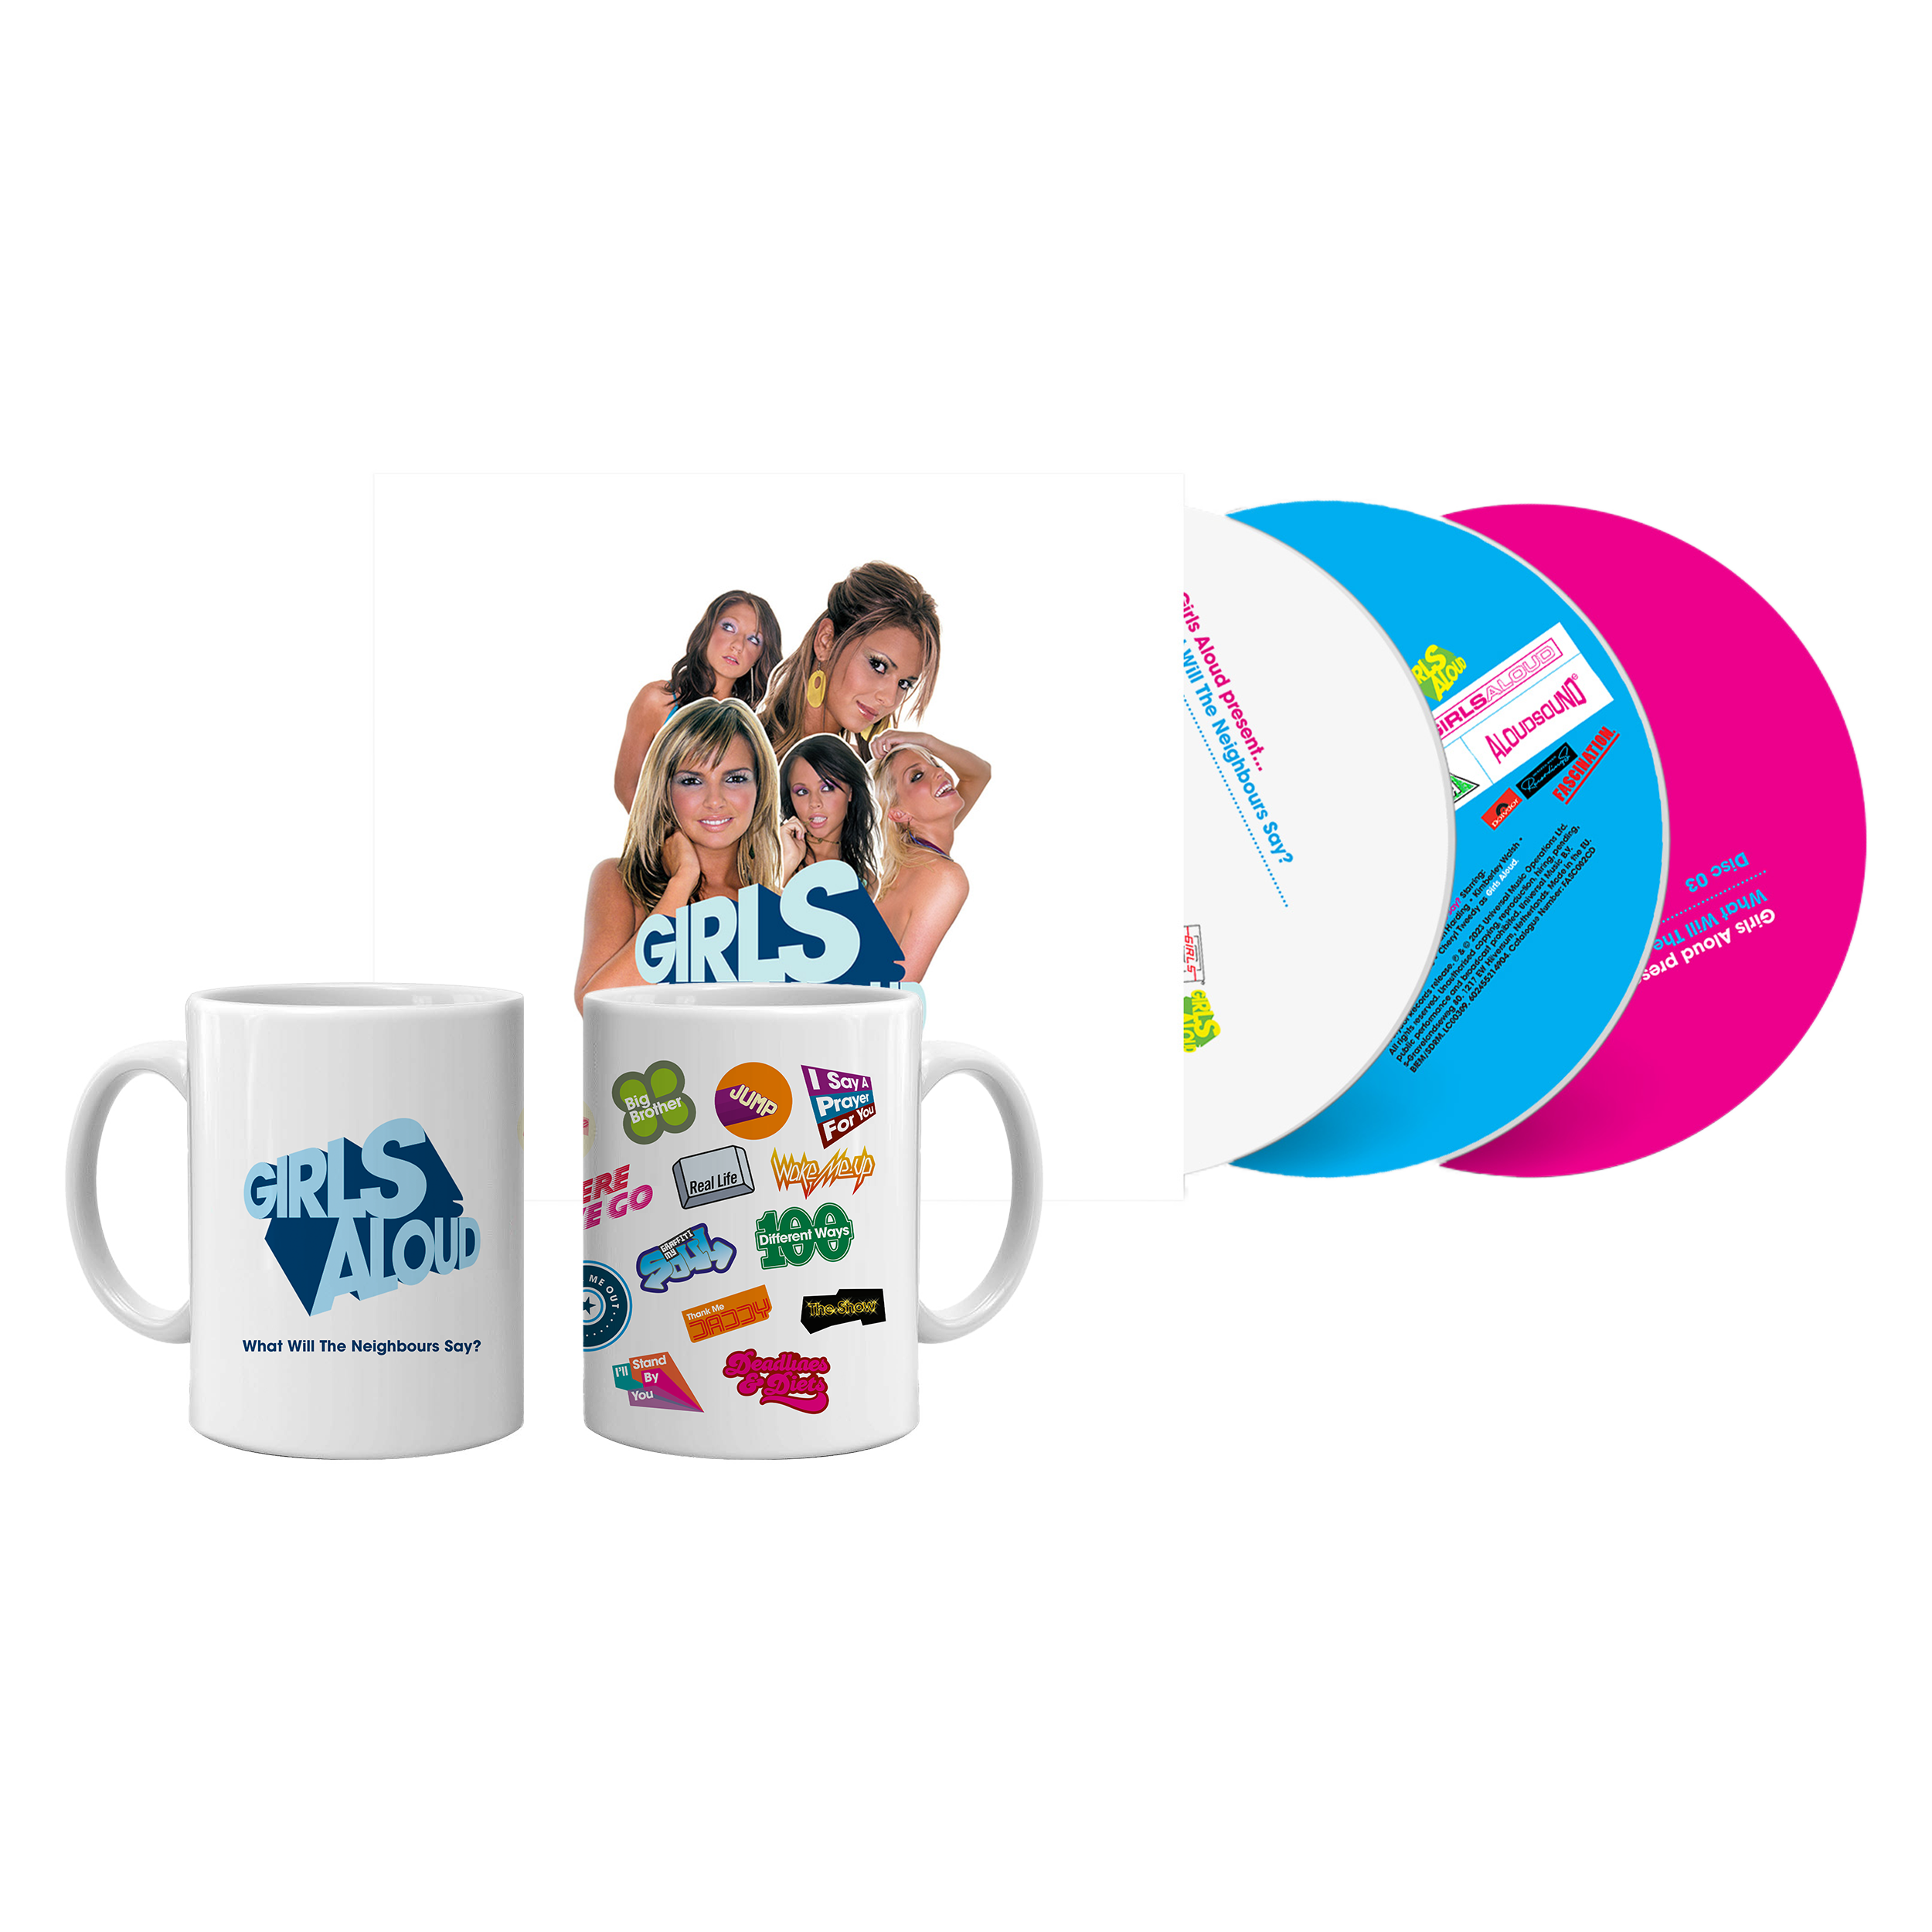 What Will The Neighbours Say? 3CD & Logos Mug